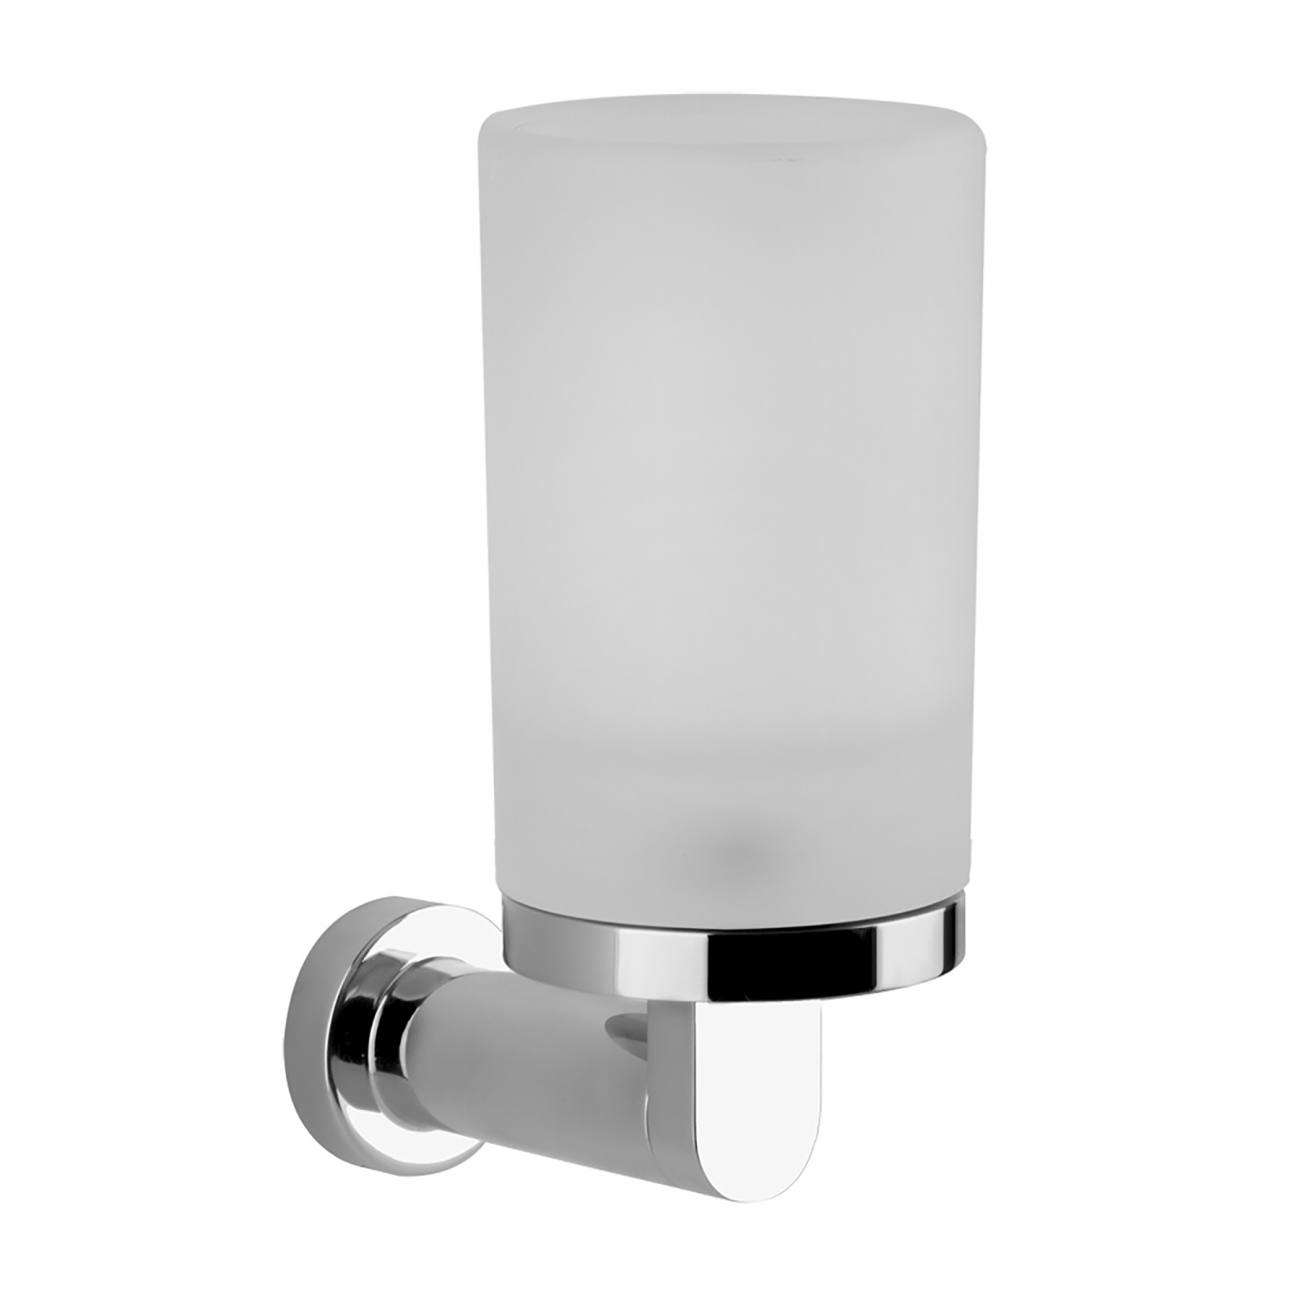 Gessi Emporio wall-mounted tumbler holder